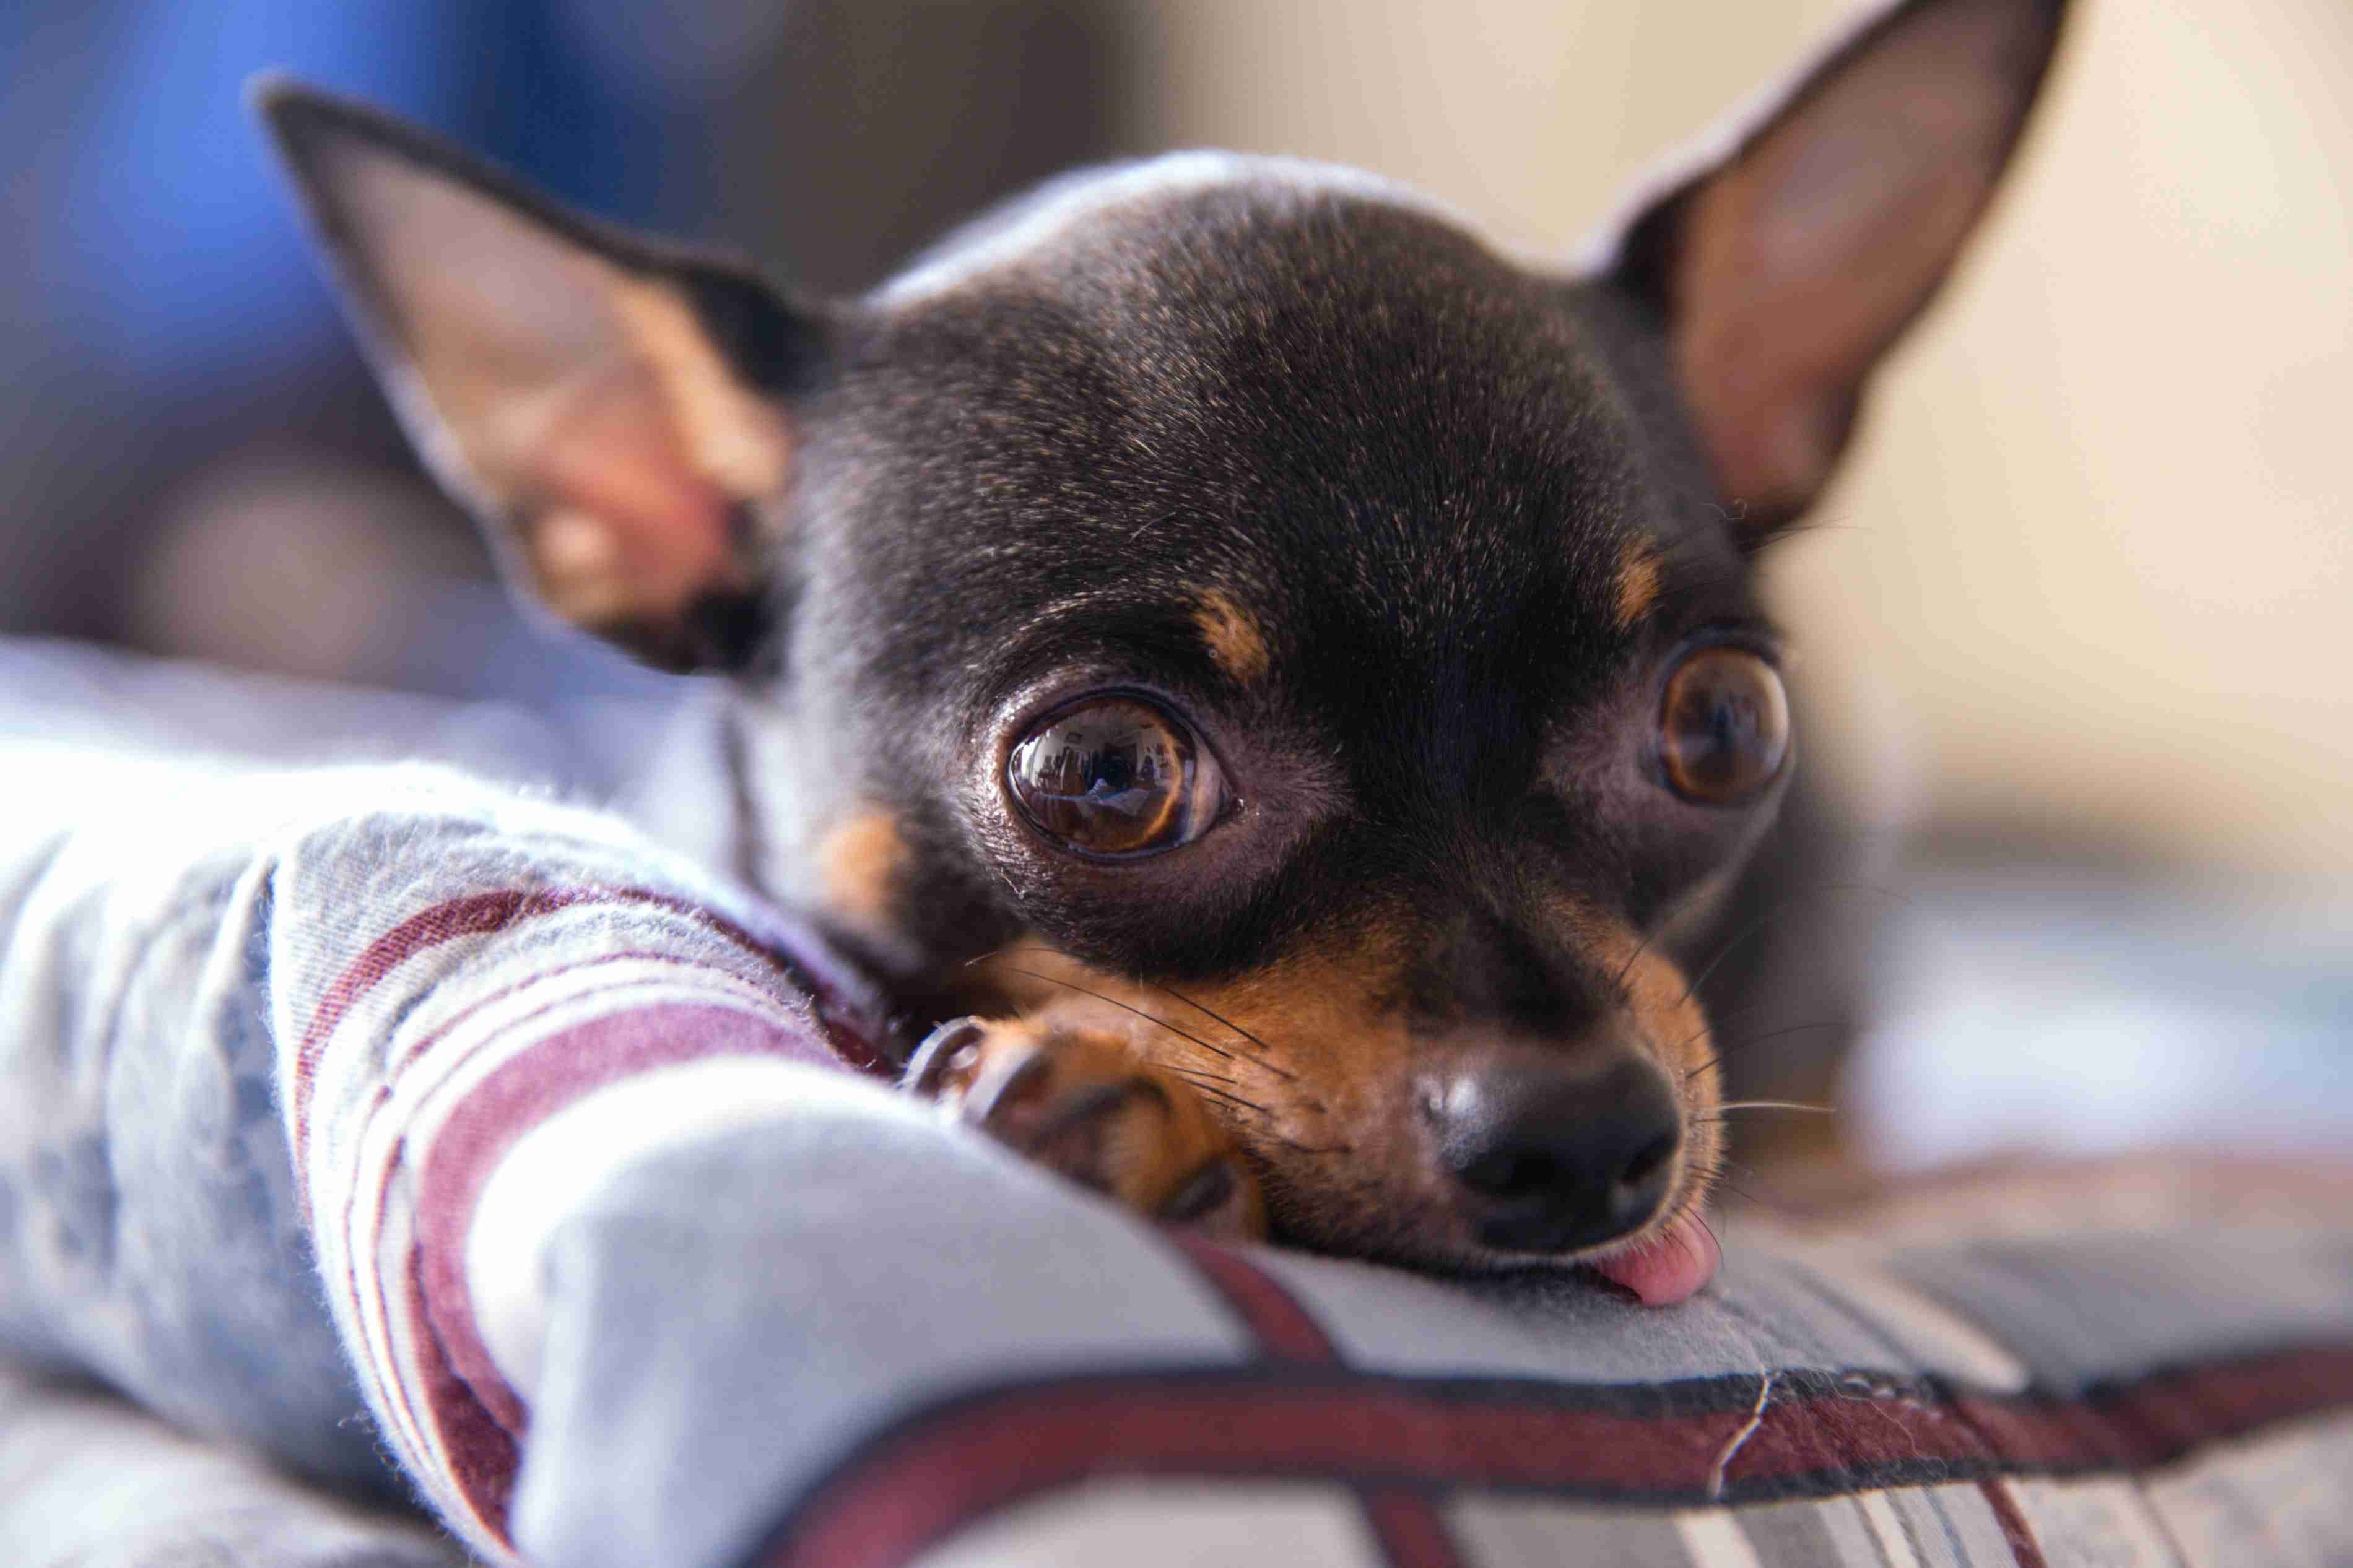 Can anger issues in Chihuahuas be a result of a lack of socialization during puppyhood?